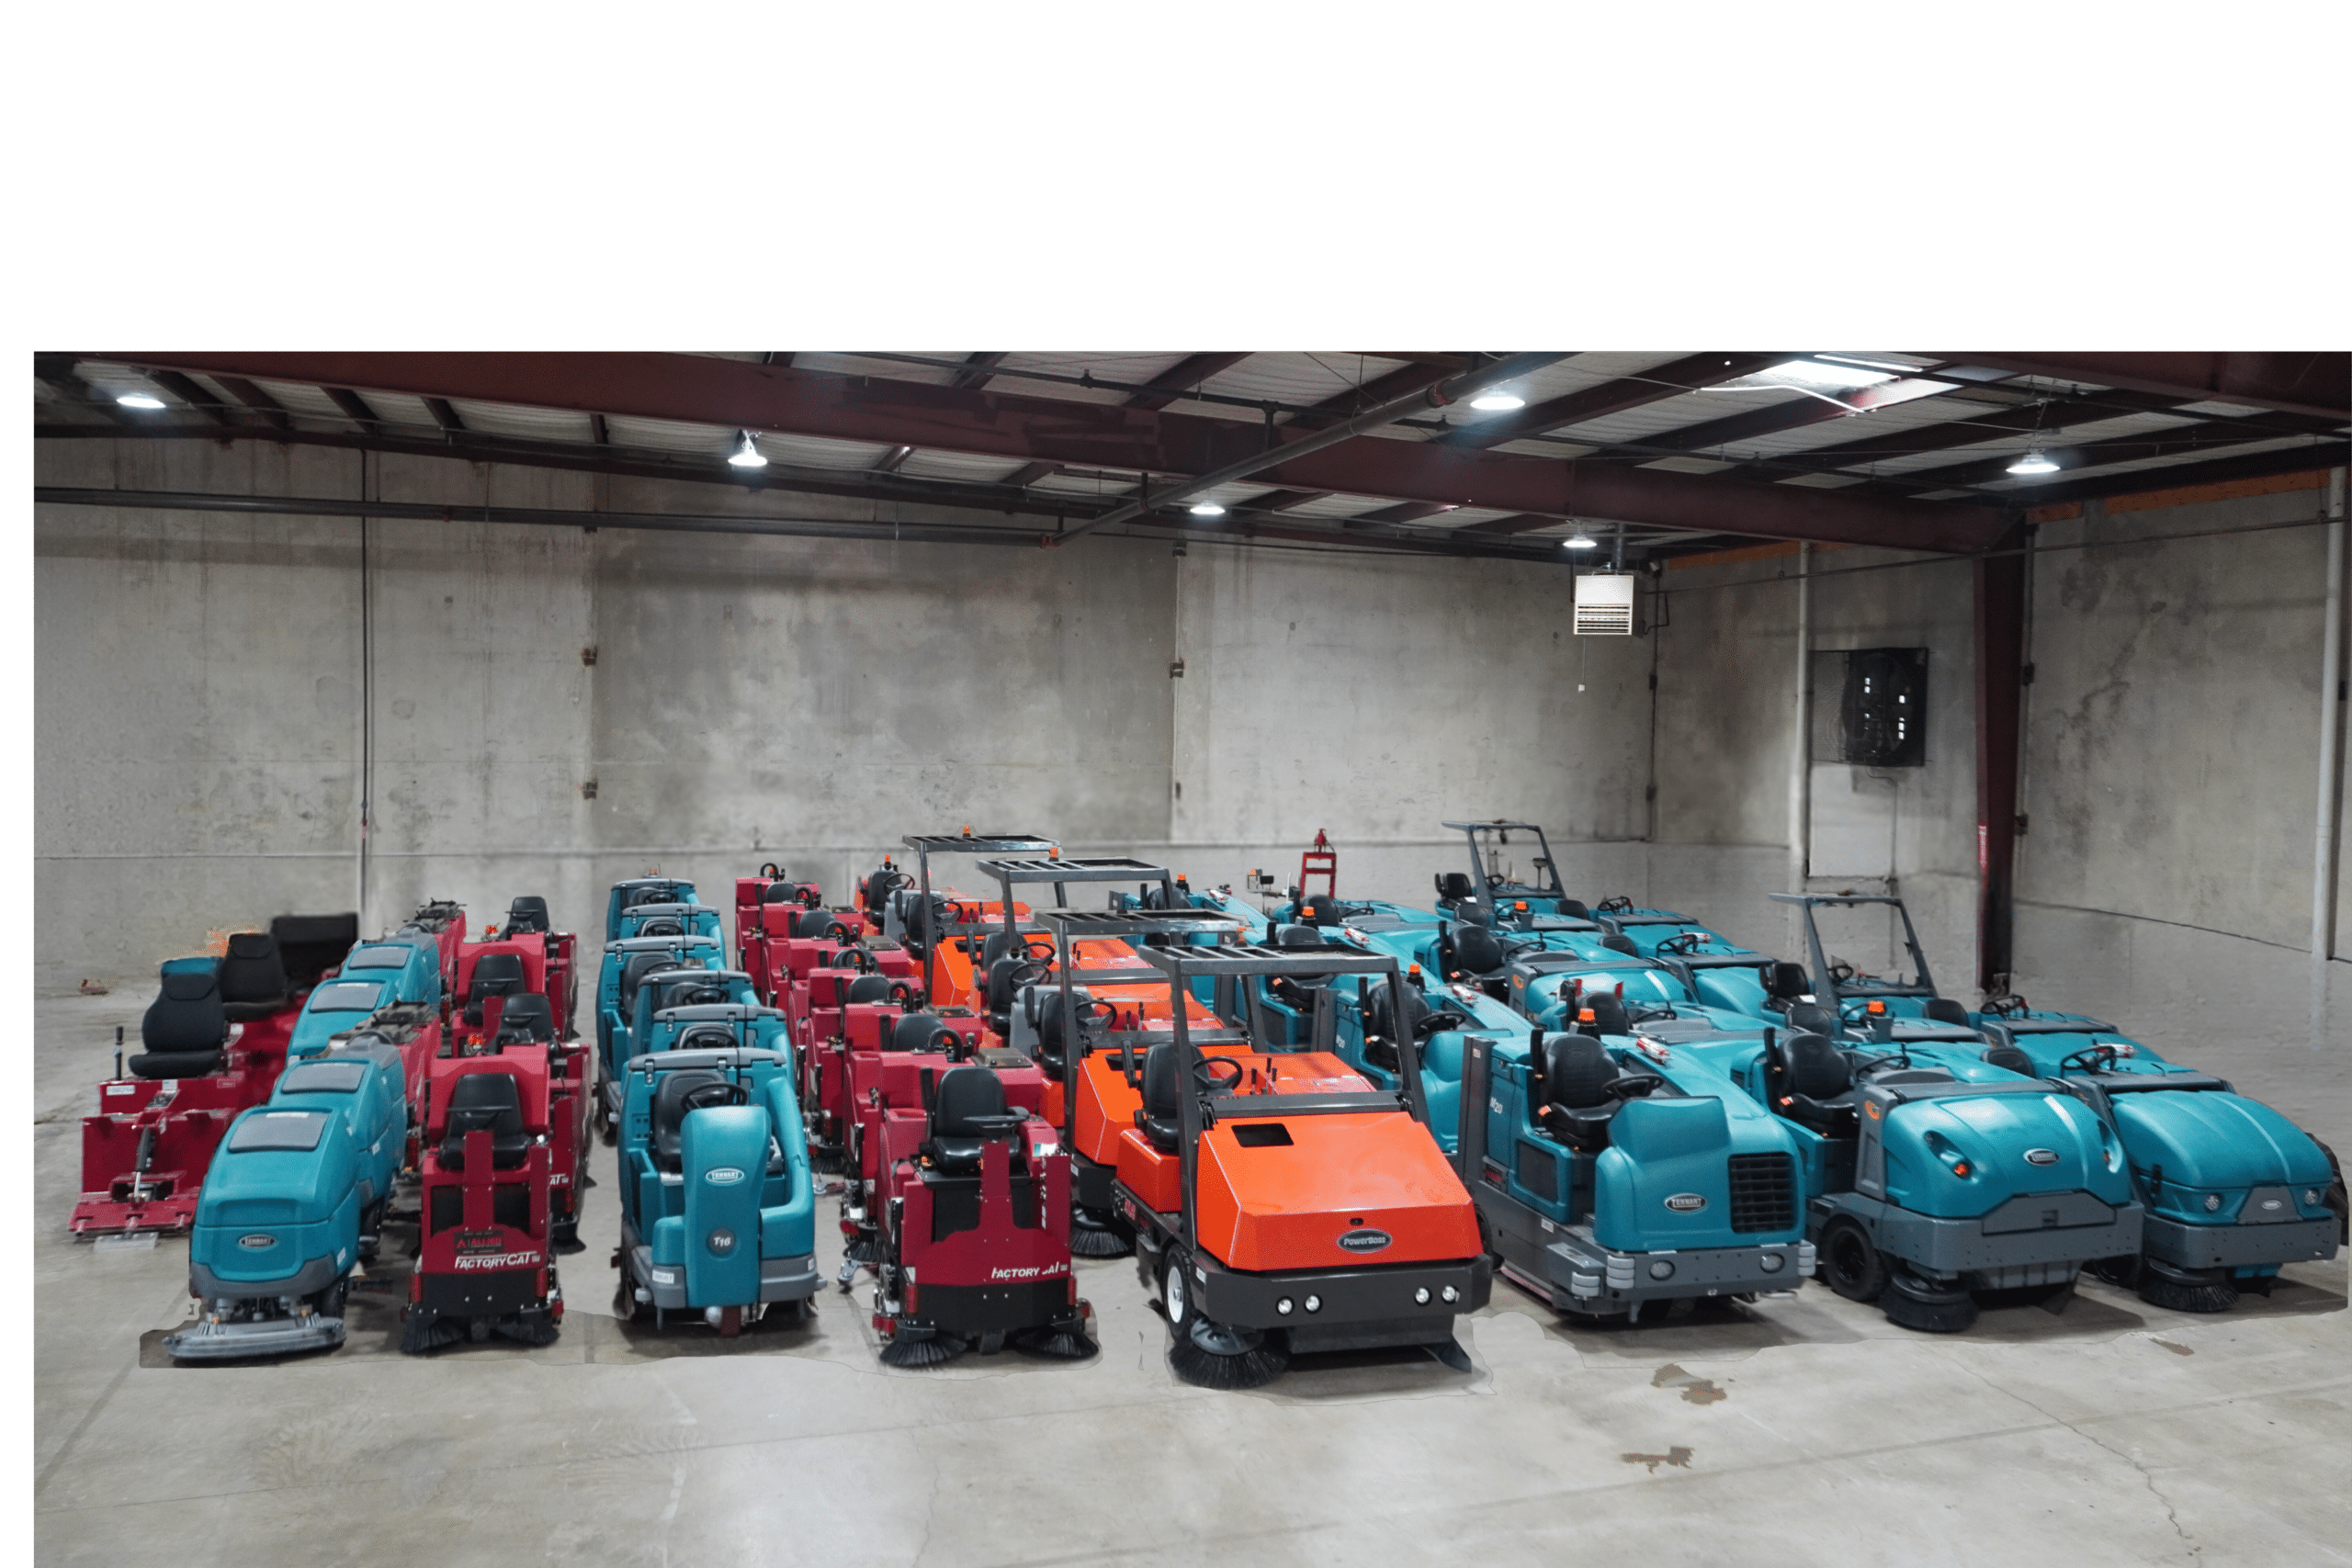 rental fleet of floor scrubbers, floor sweepers, and concrete prep equipment. The photo shows machines from multiple different brands, these brands include tennant, powerboss, and factorycat. The photo is taken inside the warehouse of Allied Flooring Solutions in Arlington TX